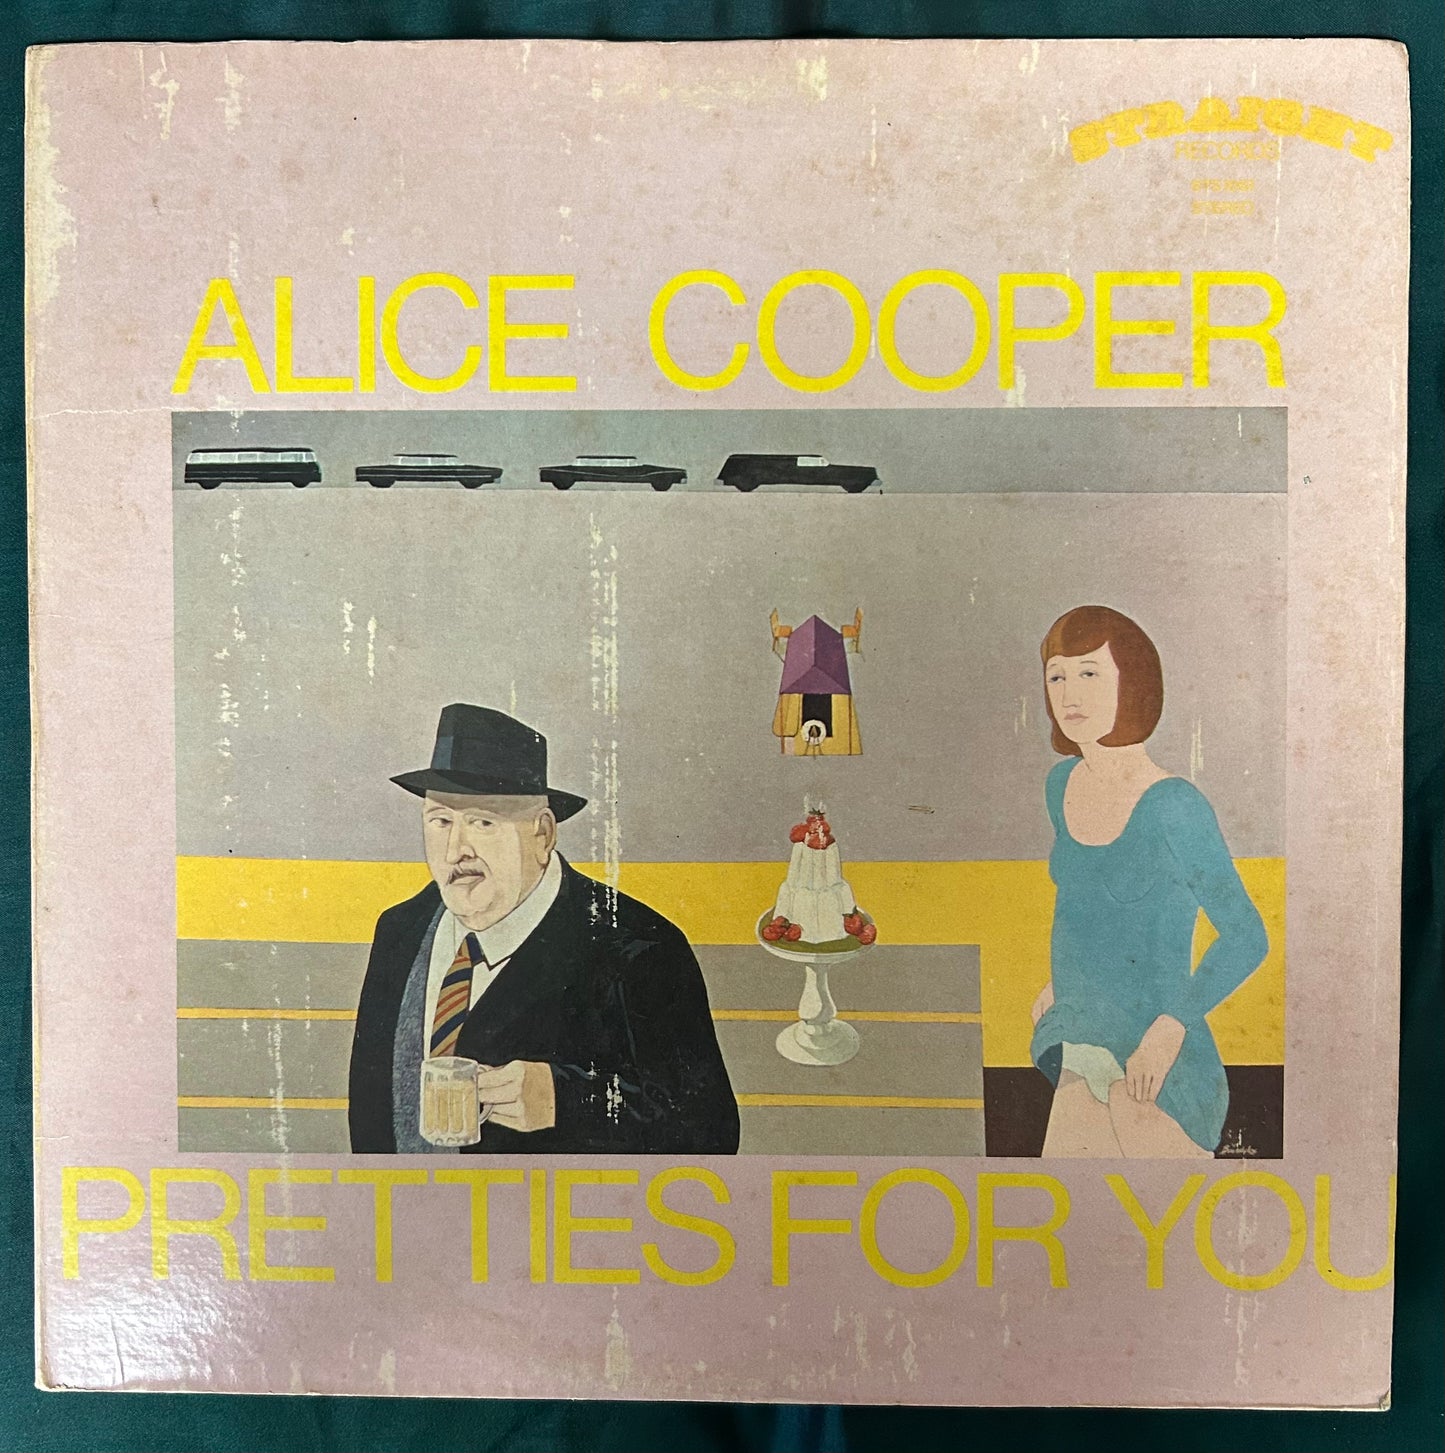 Alice Cooper - Pretties For You 1st Press 1969 Straight Pink Label